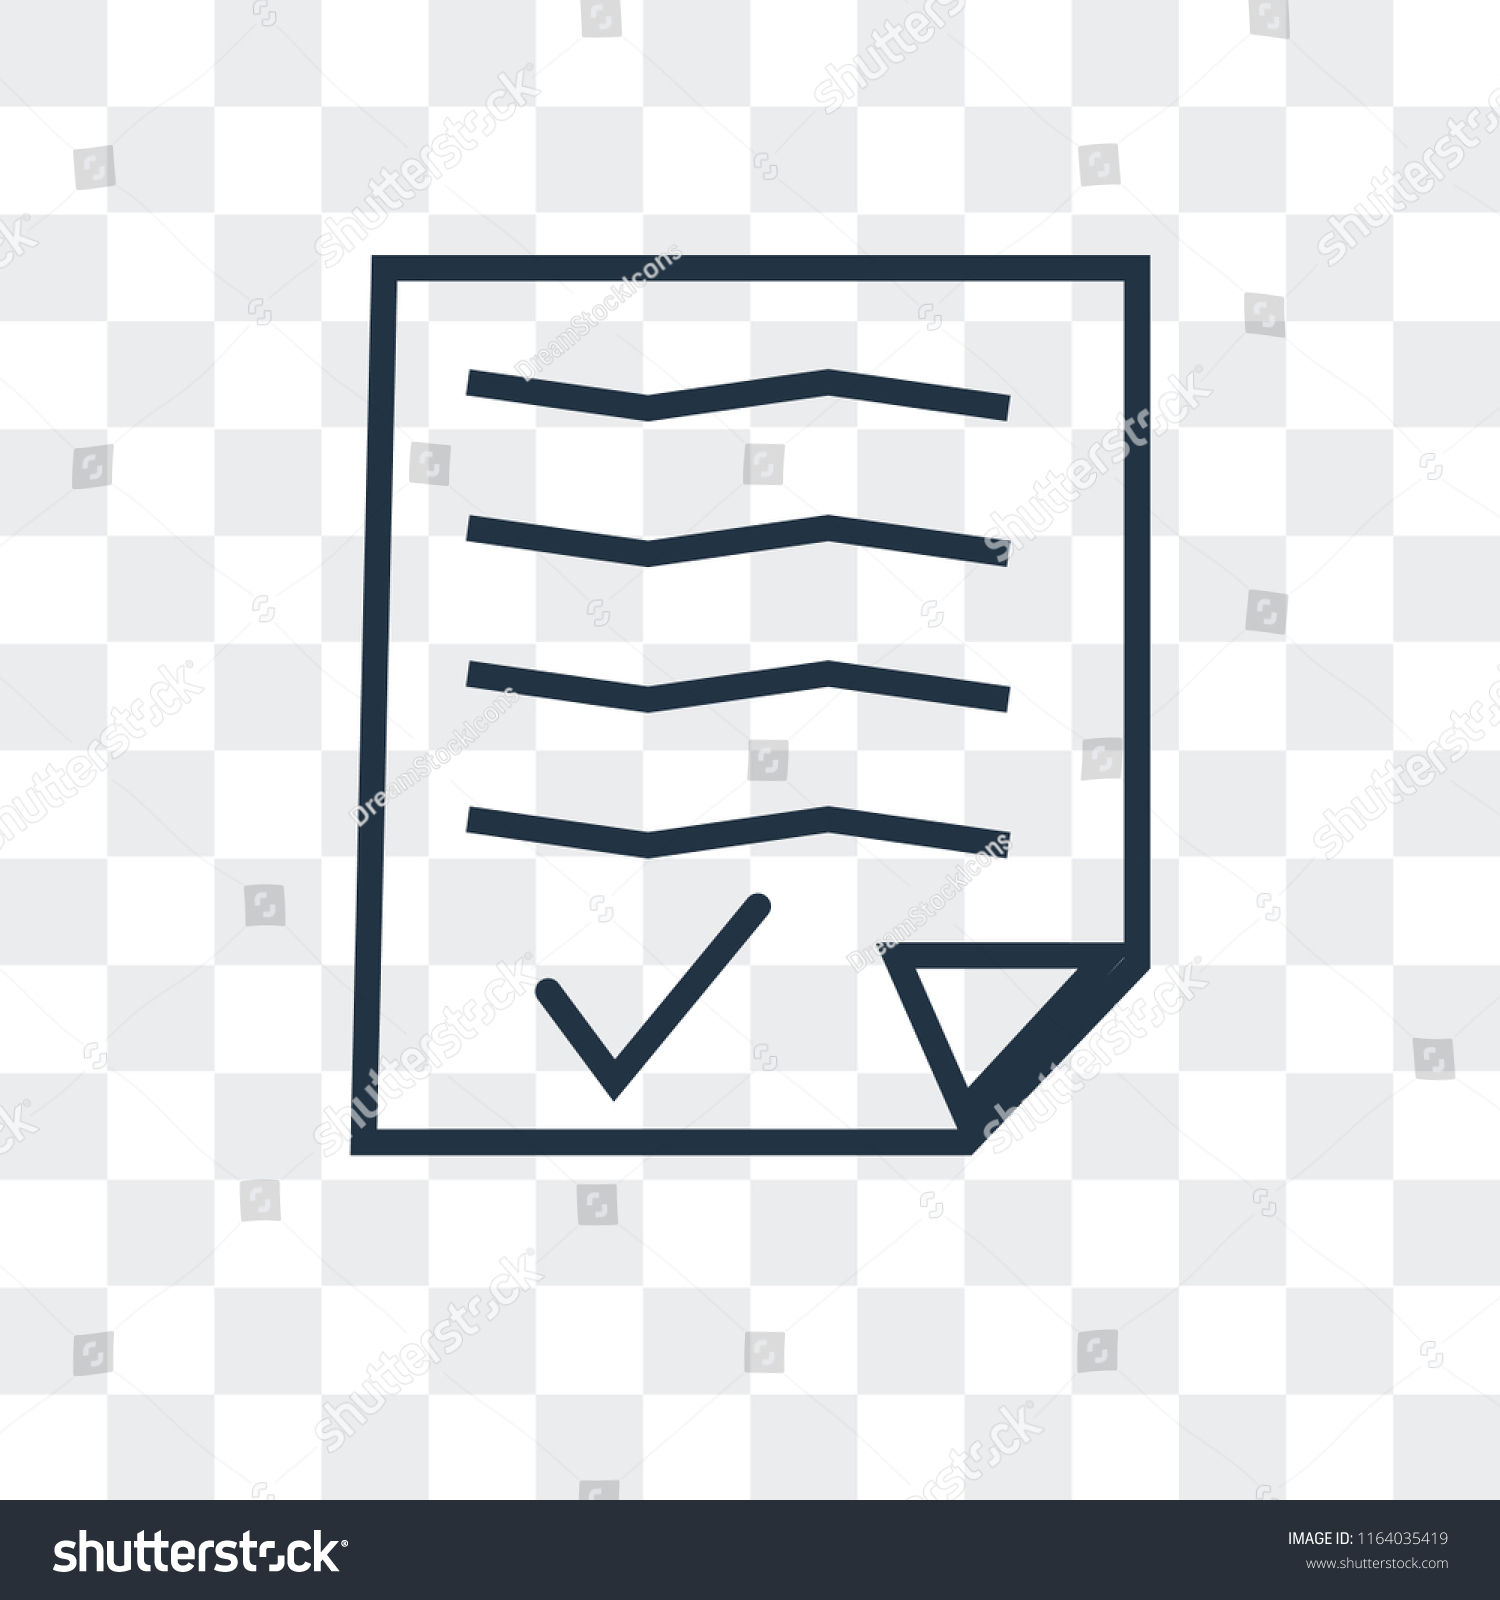 Agenda Vector Icon Isolated On Transparent Stock Vector Royalty Free